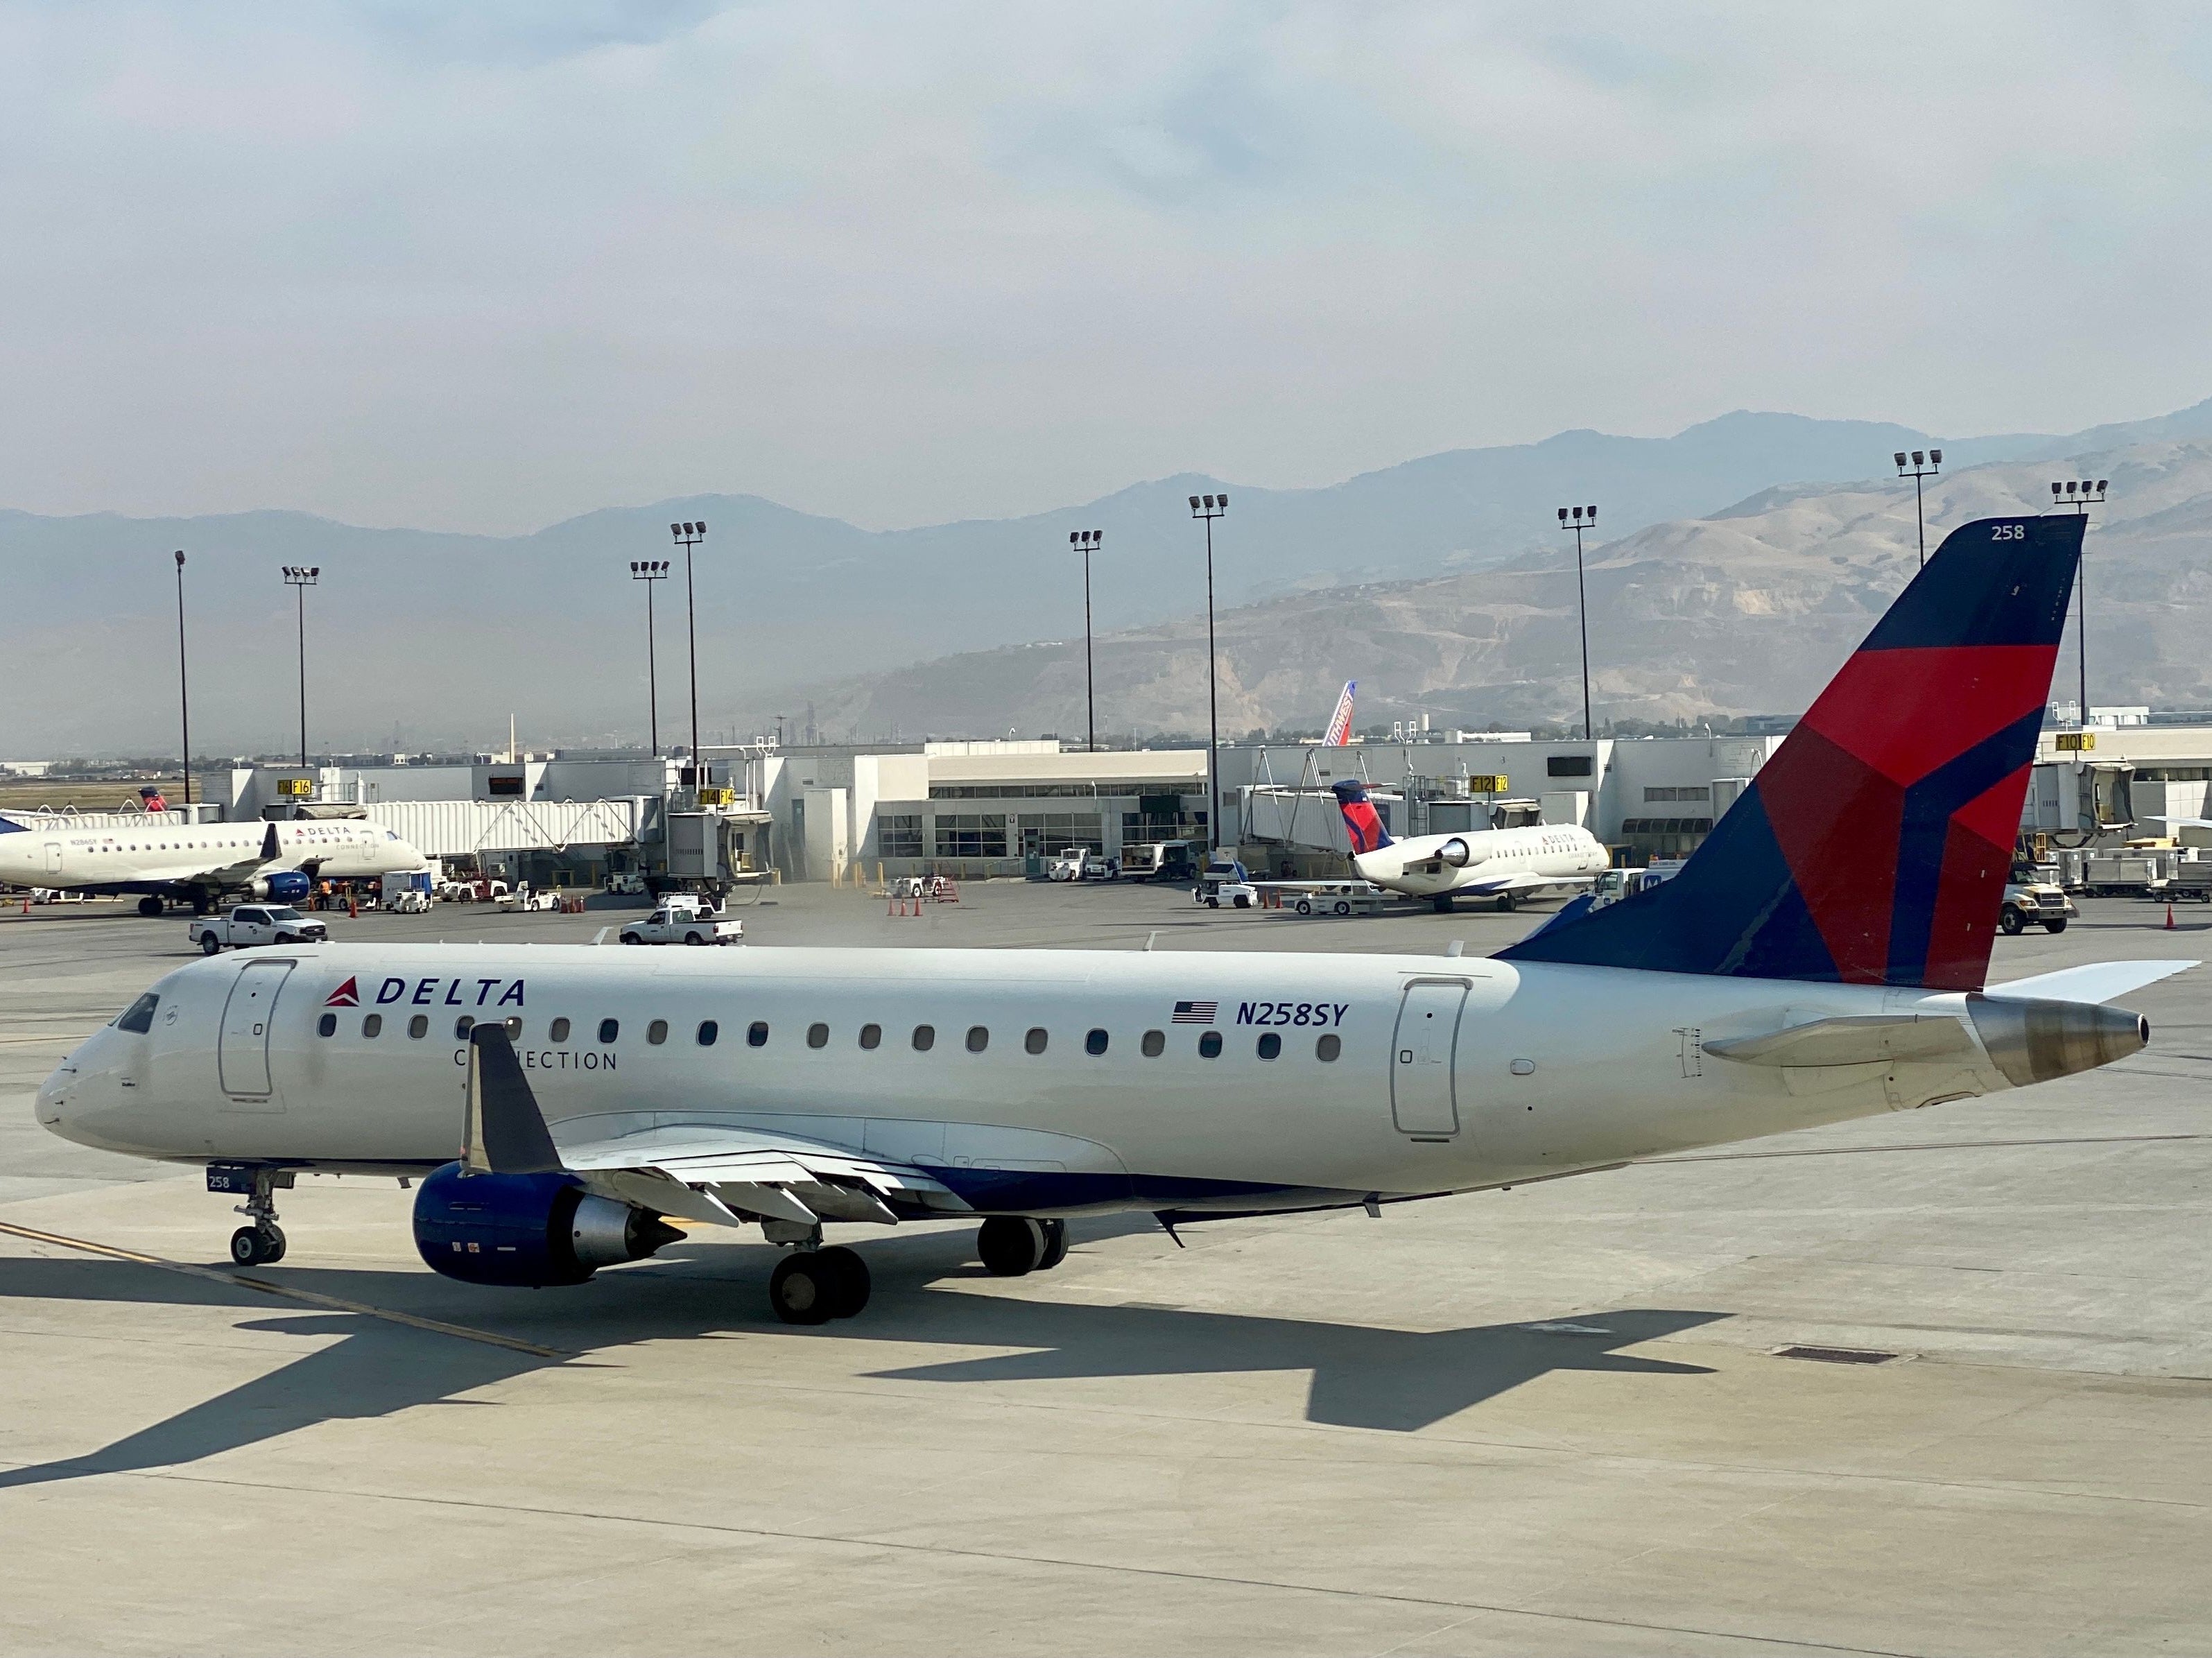 In this file photo a Delta Airlines plane is seen at the gate at Salt Lake City International Airport (SLC), Utah, on 5 October 2020